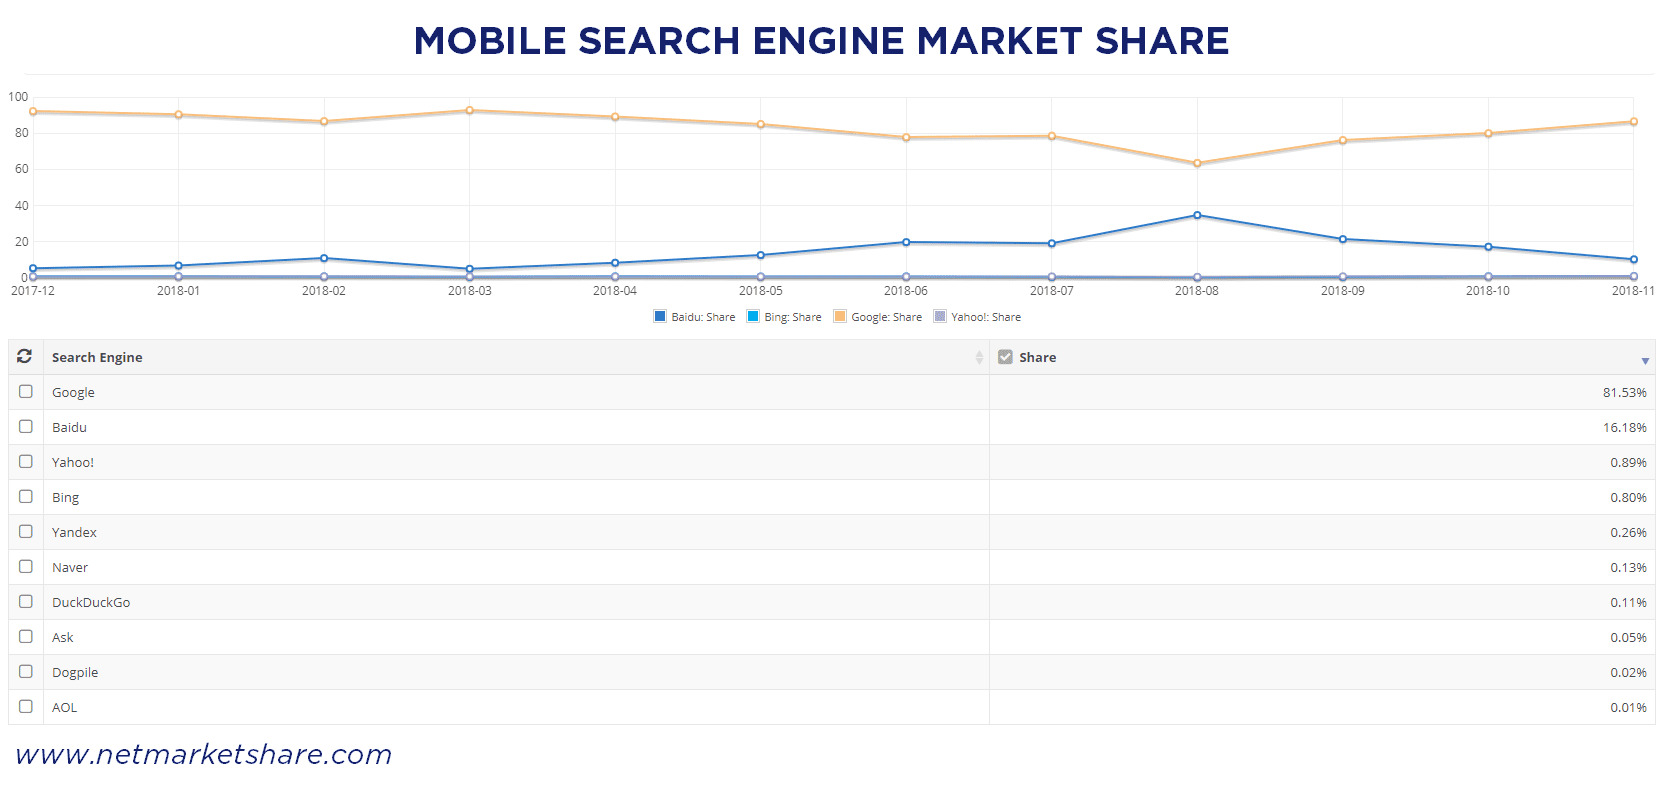 which search engine gets the most traffic? The top three search engines are Google, Baidu, and Yahoo!